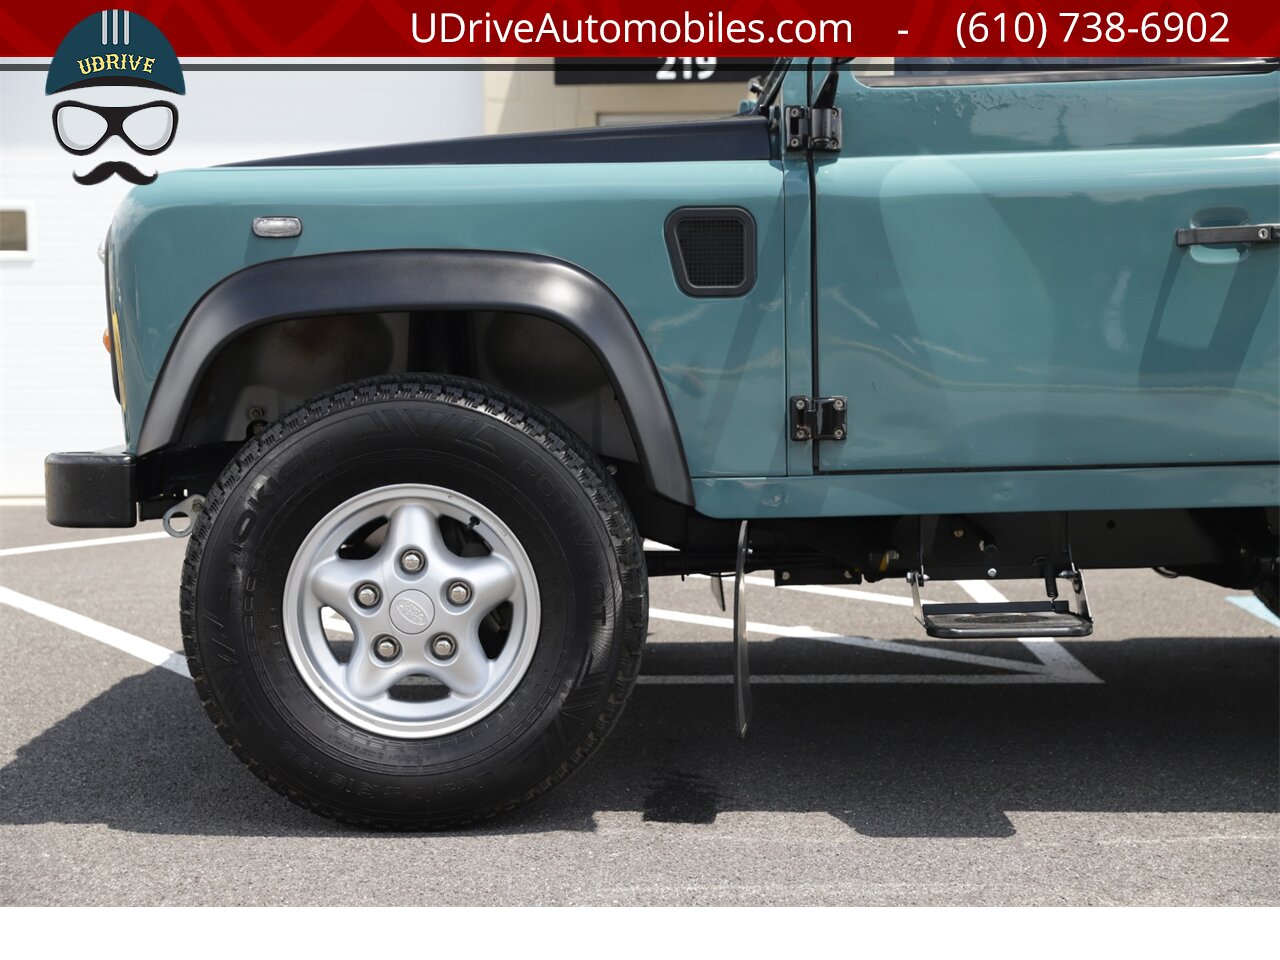 1986 Land Rover Defender 90 D90 4.0L V8 5 Speed Manual New Interior  $25k Recent Engine Build - Photo 9 - West Chester, PA 19382